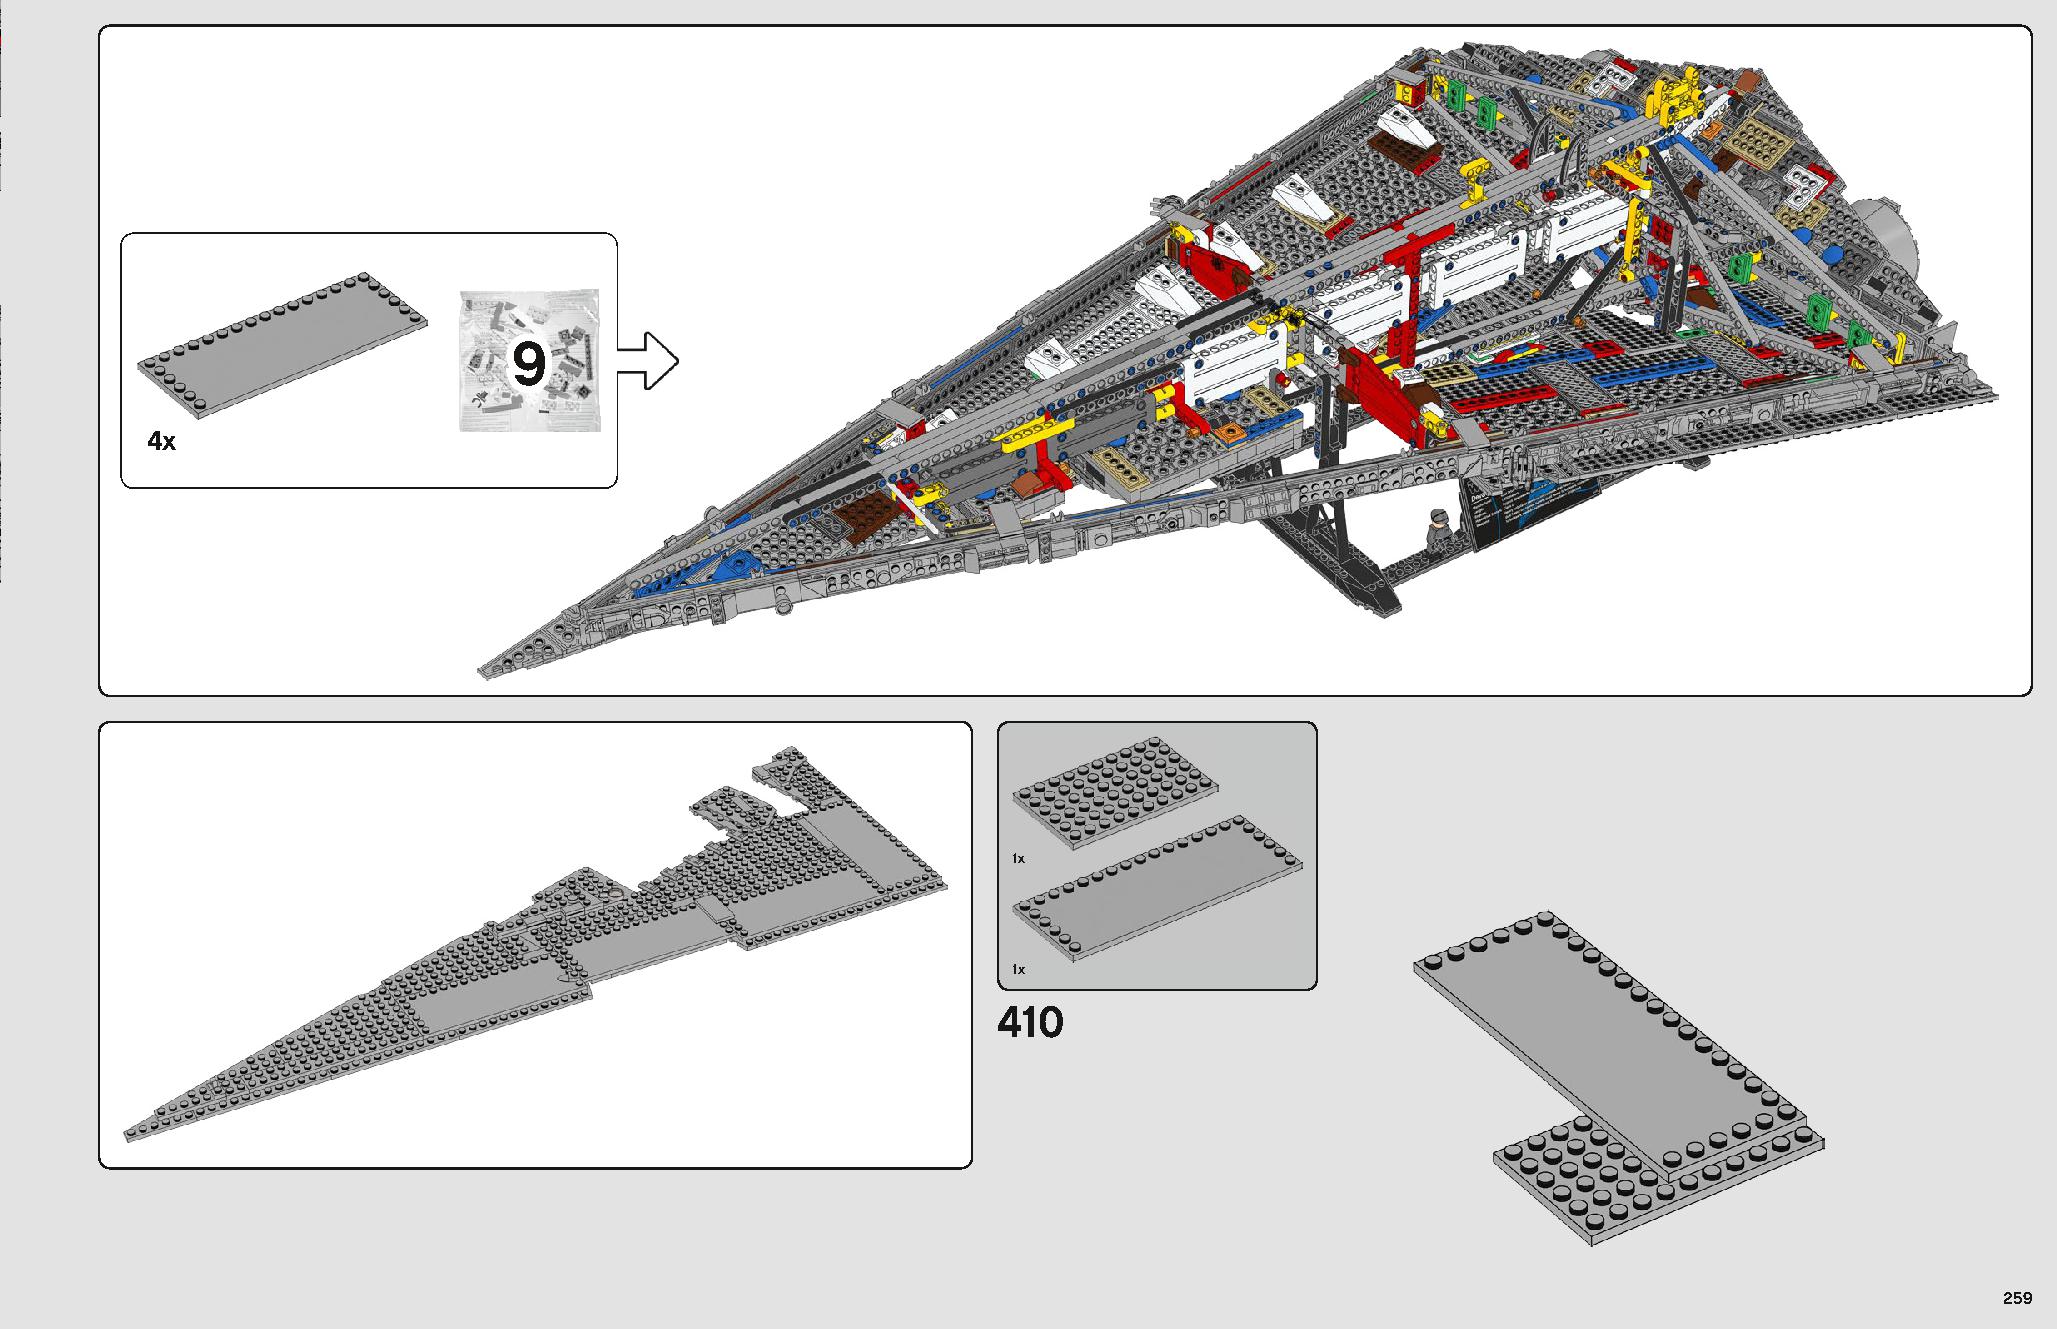 Imperial Star Destroyer 75252 レゴの商品情報 レゴの説明書・組立方法 259 page